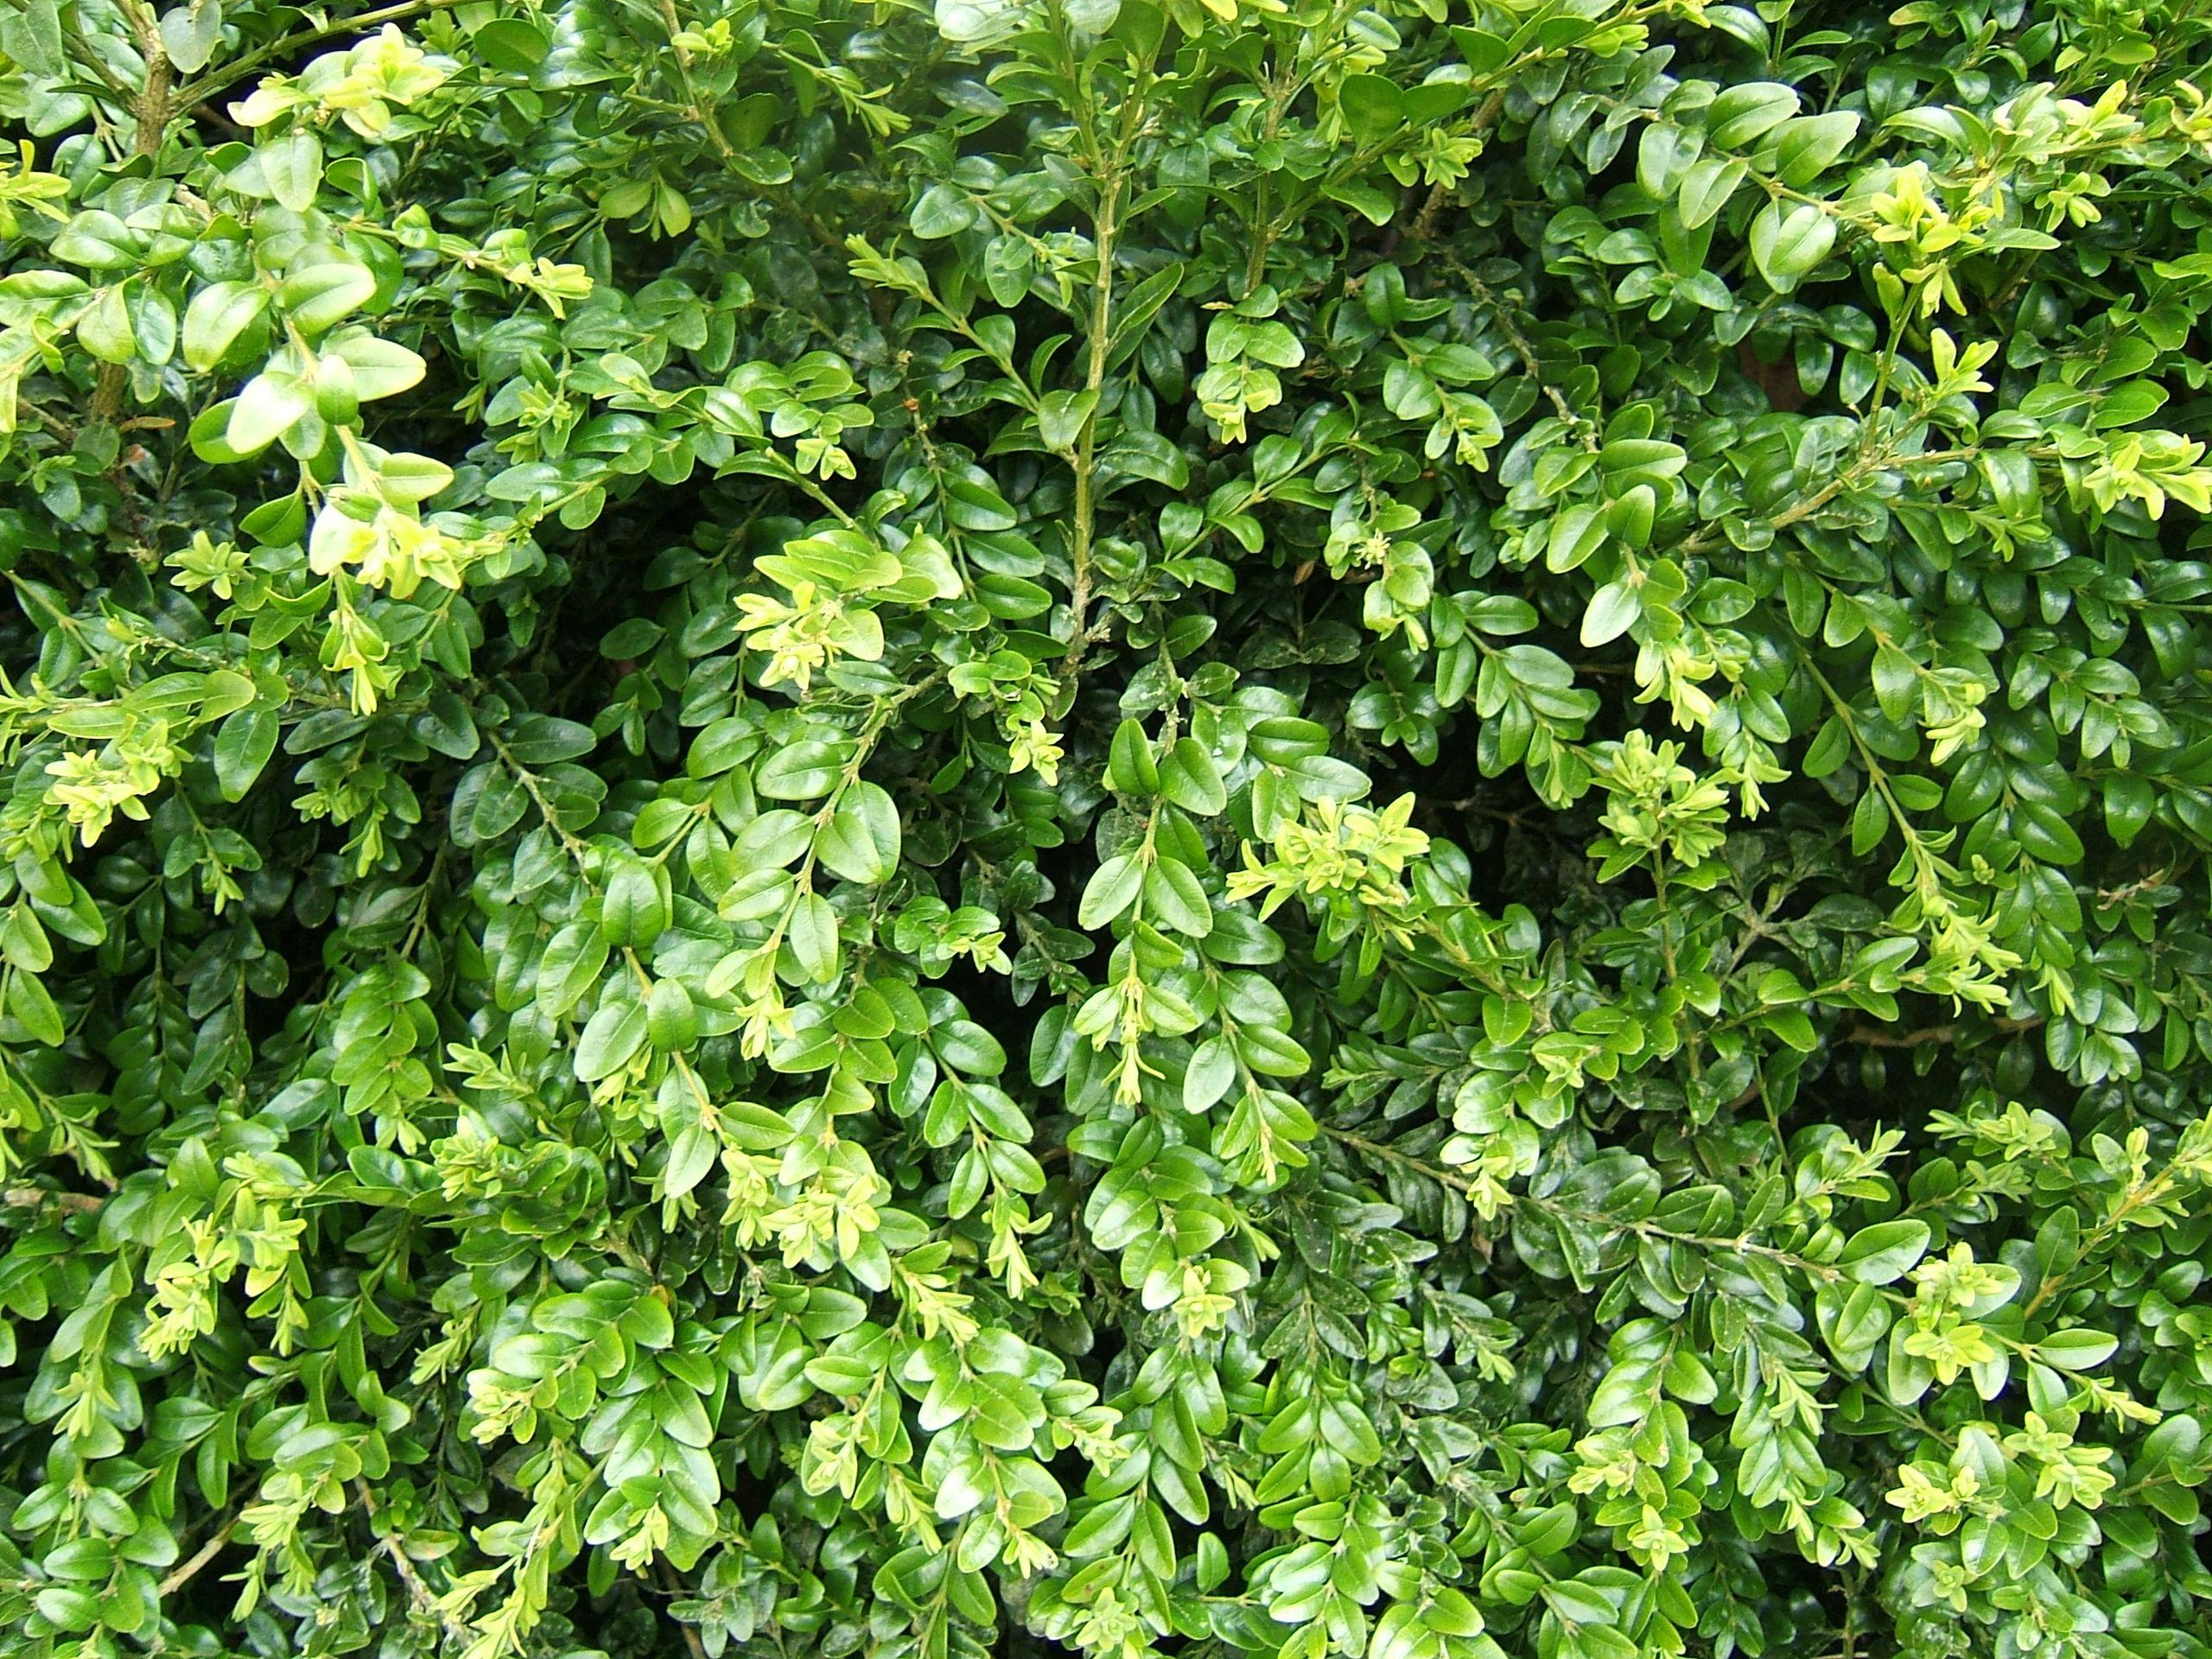 Lime-green leaves with stems.